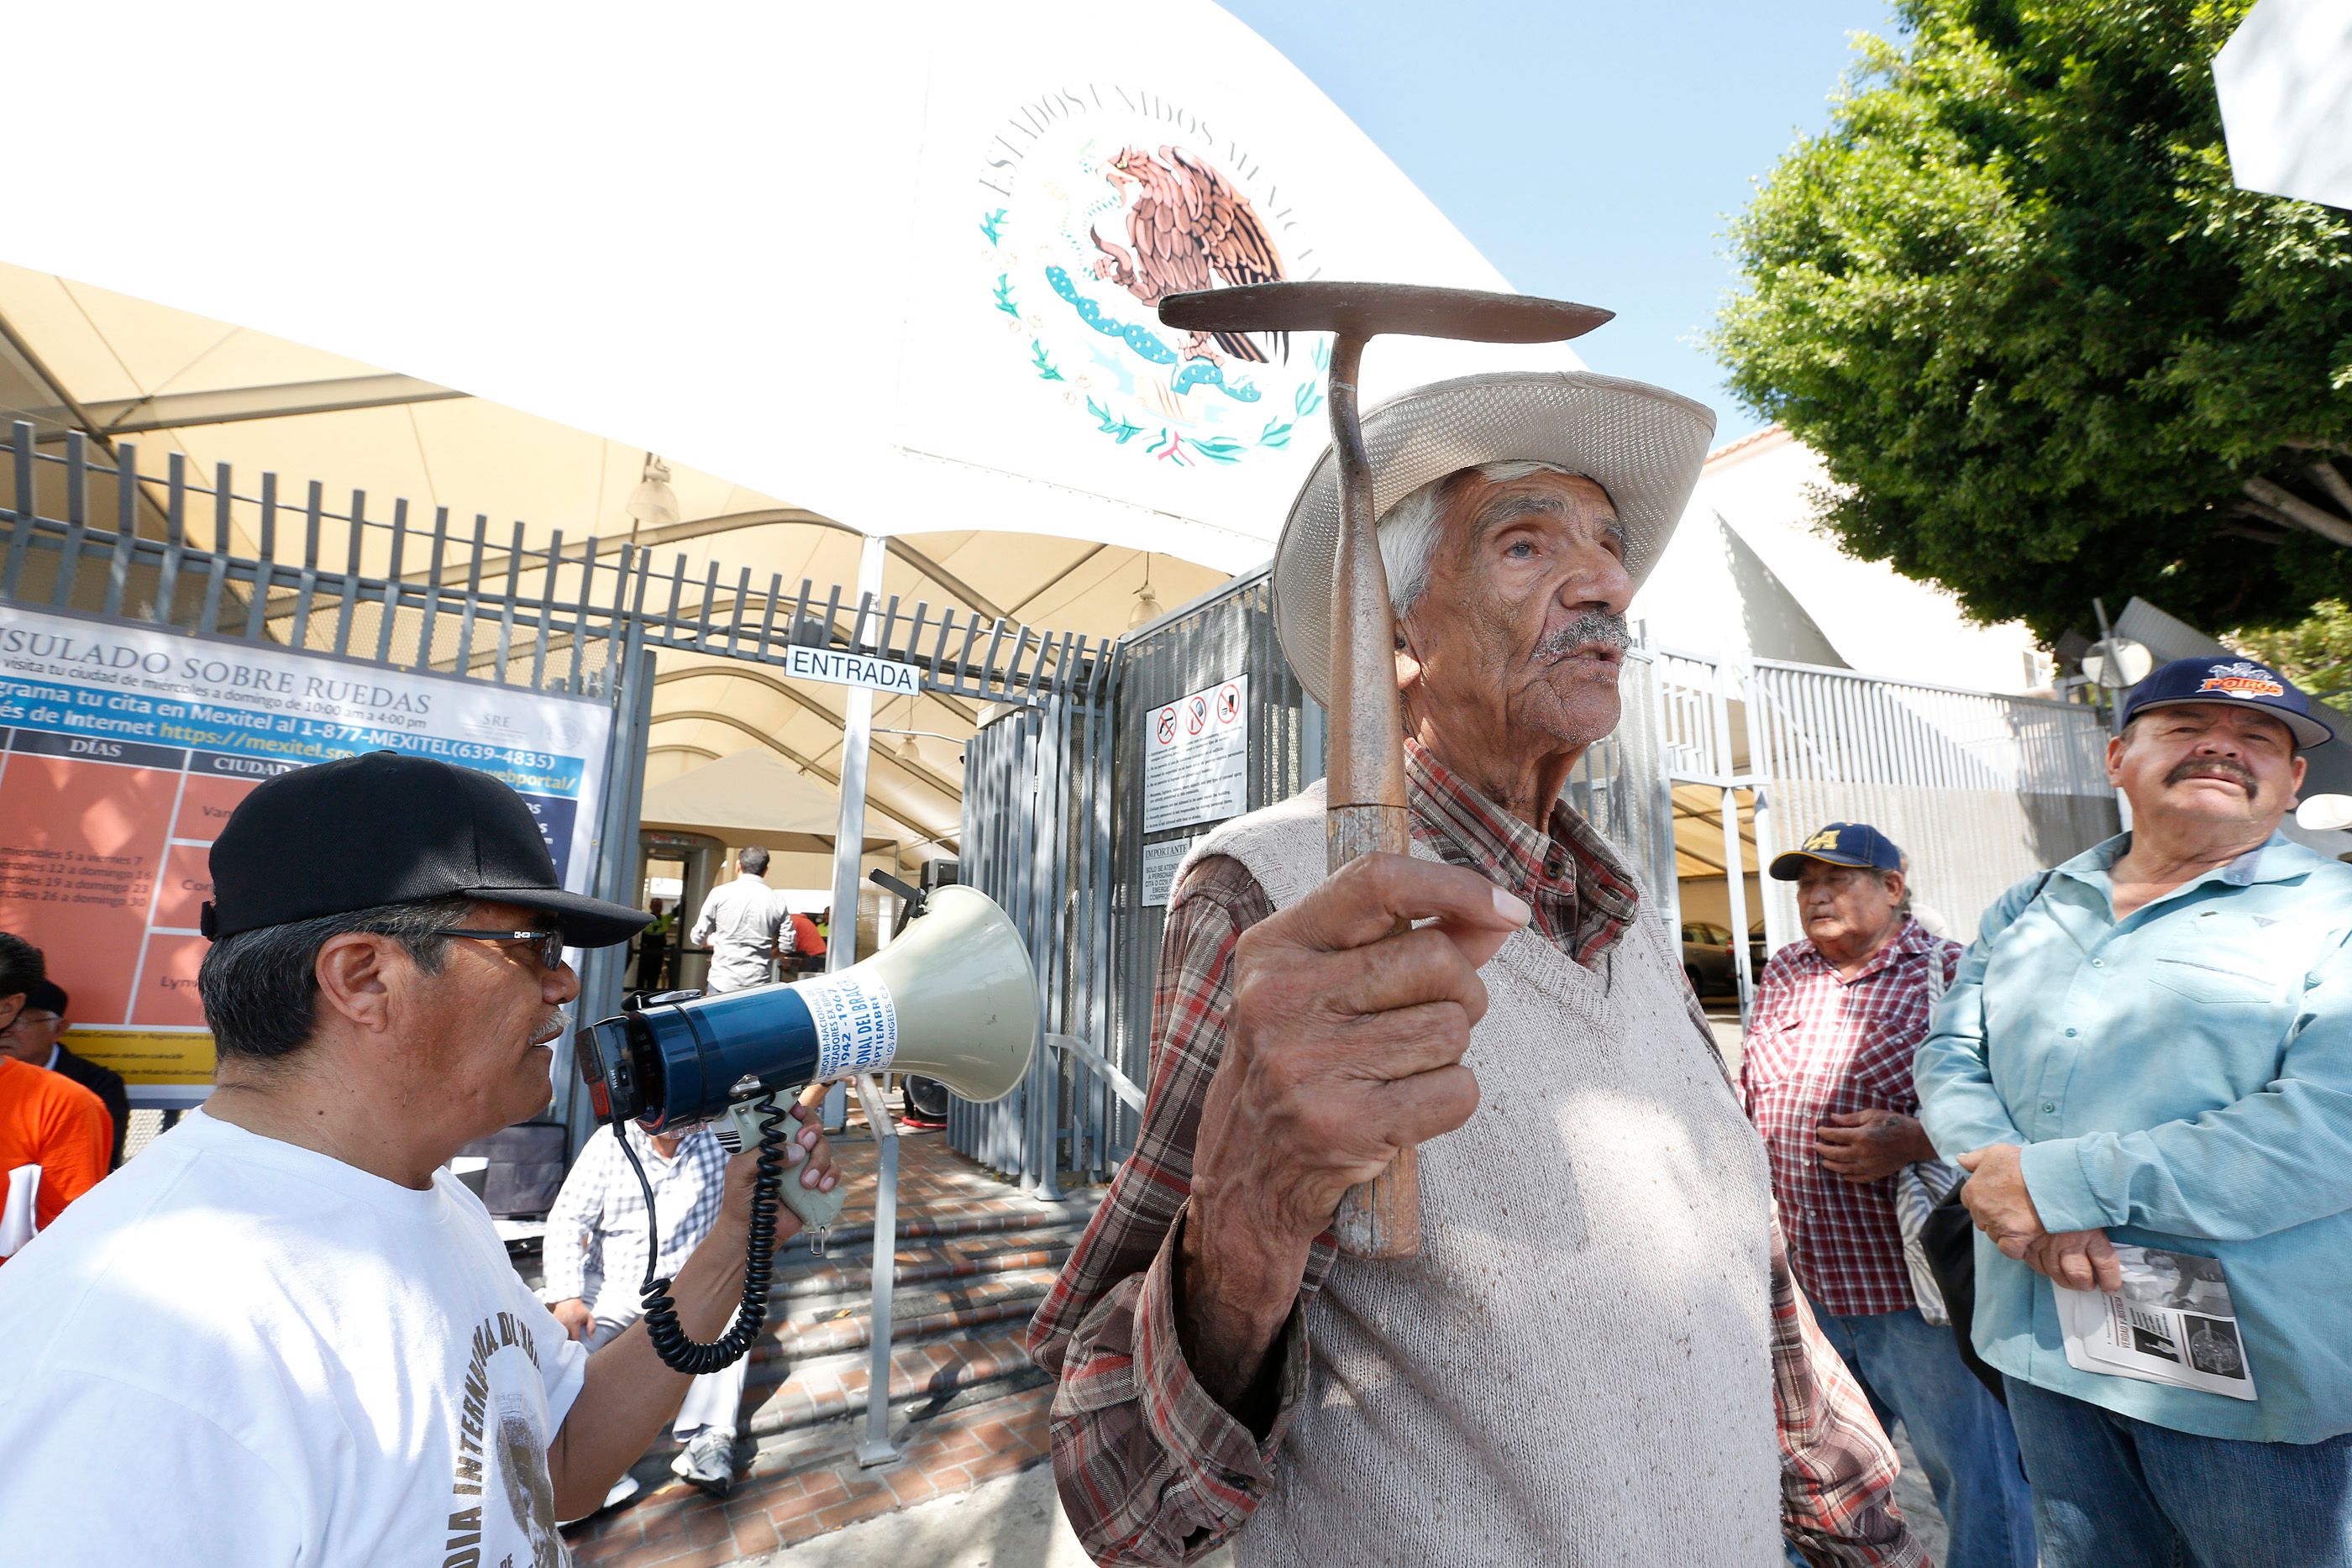 Manuel Becerra says that the government of Mexico owes him more money for what was taken from them weekly when he was part of the Bracero Program between 1954 and 1962. (Aurelia Ventura / La Opinion)